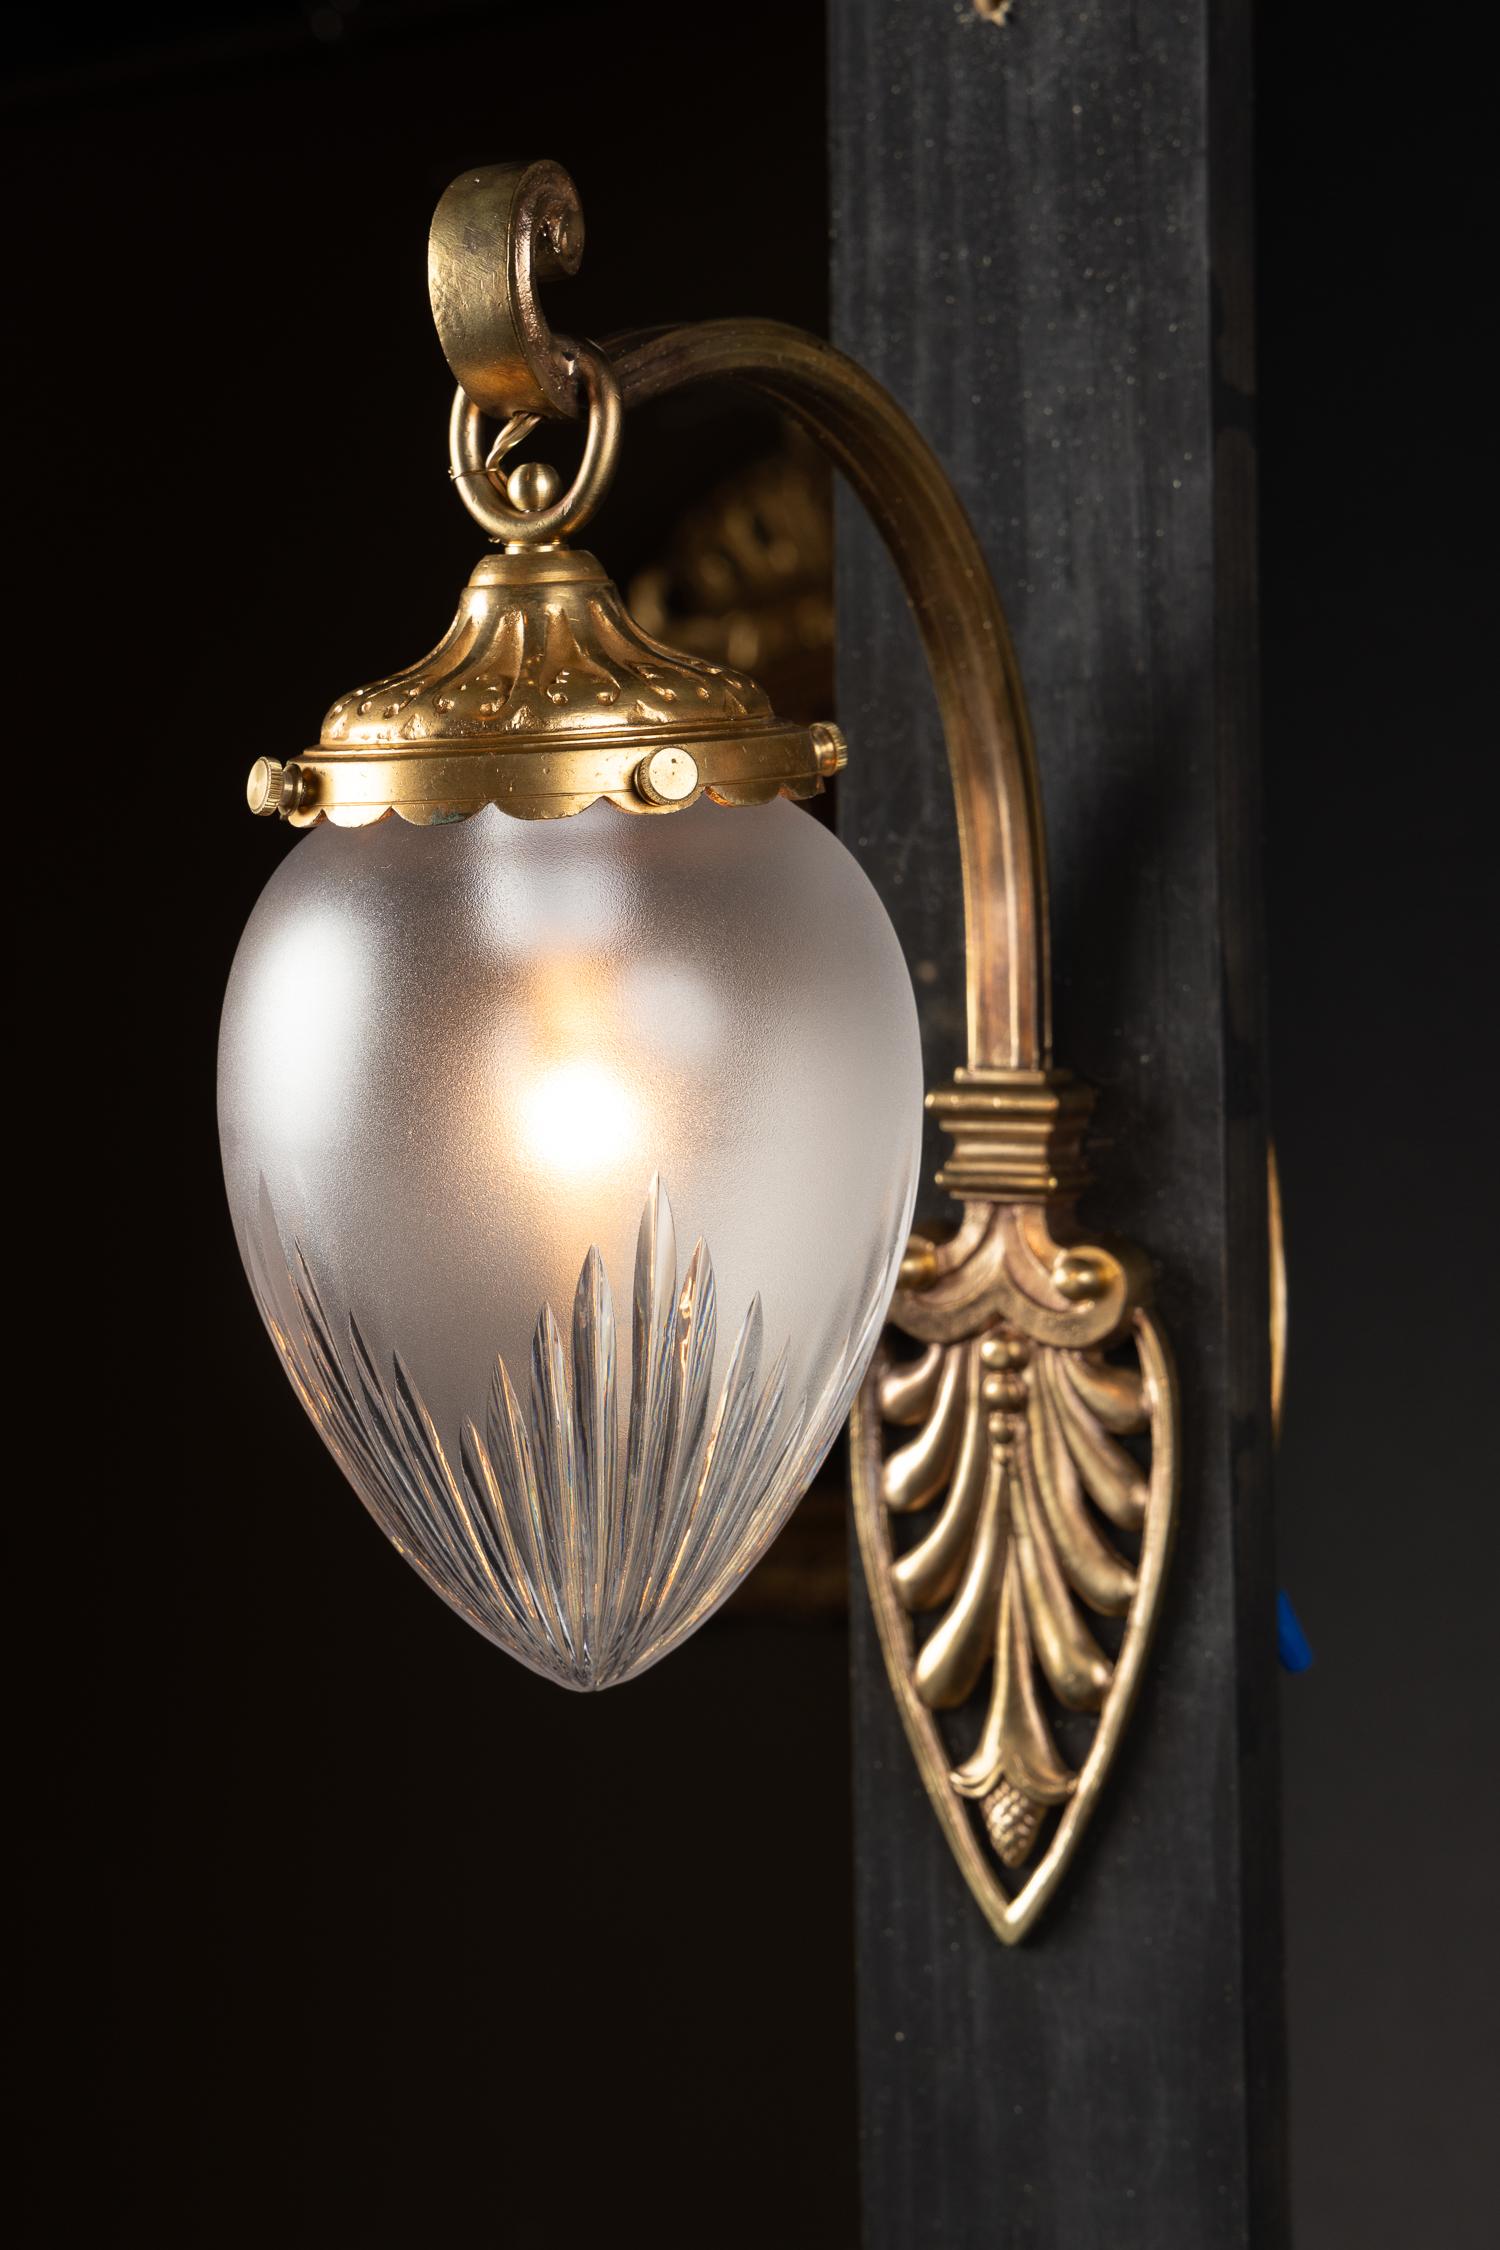 This fantastic pair of bronze sconces features etched satin glass globes at the end of each delicate and detailed scrolling arm. The arms are embellished with a reticulated palmetto leaf back plate which mirrors the movement found in the glass